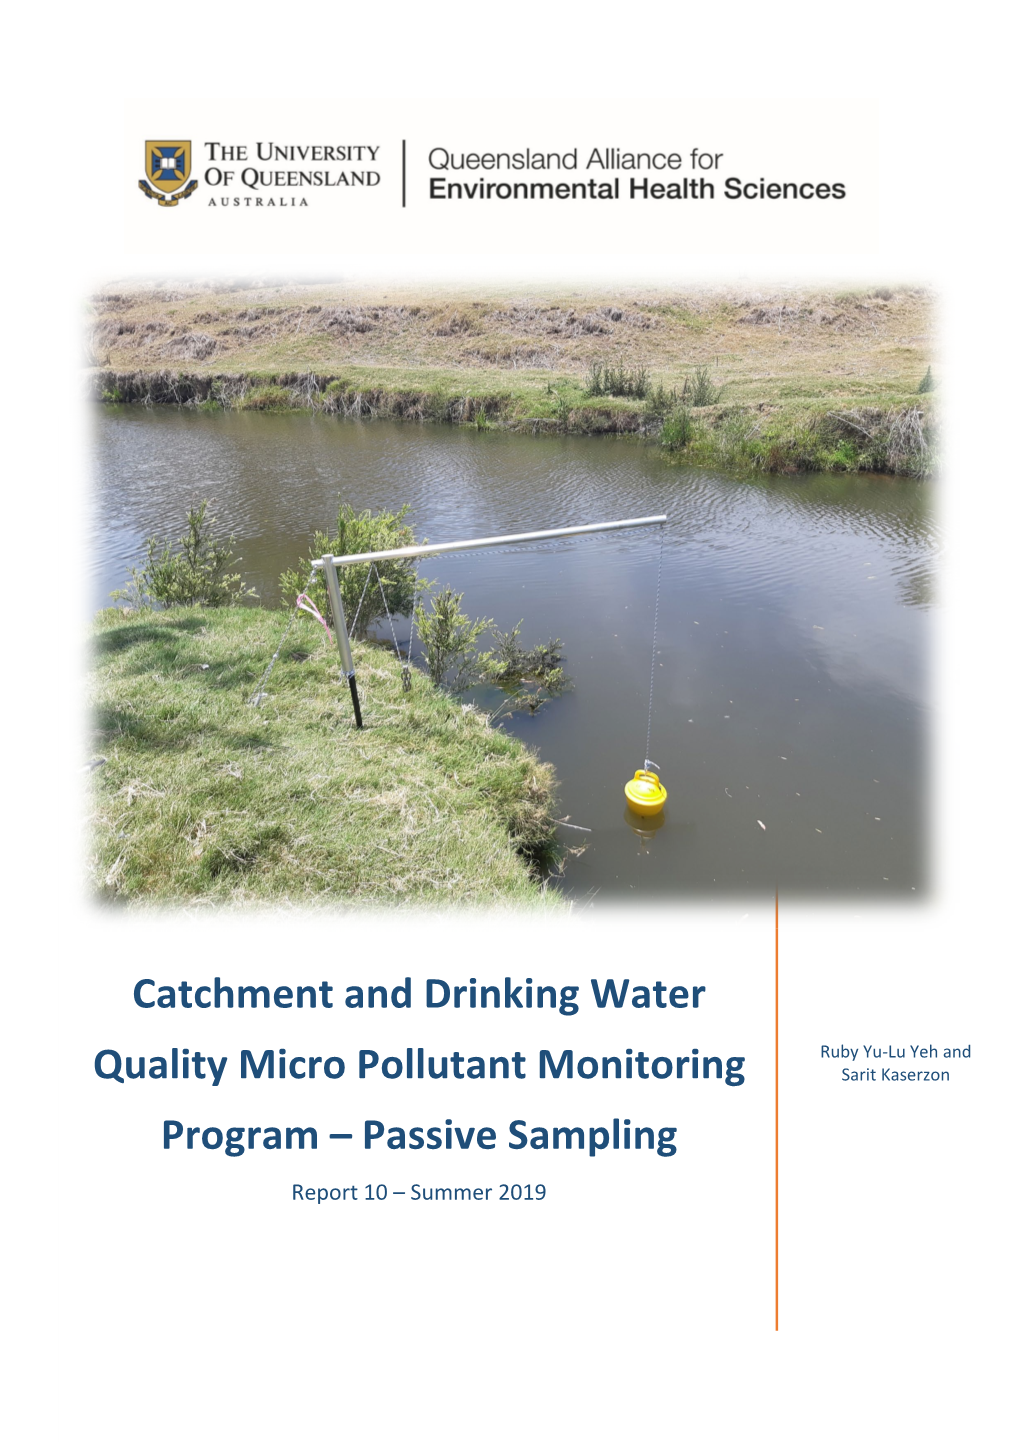 Catchment and Drinking Water Quality Micro Pollutant Monitoring Program – Passive Sampling